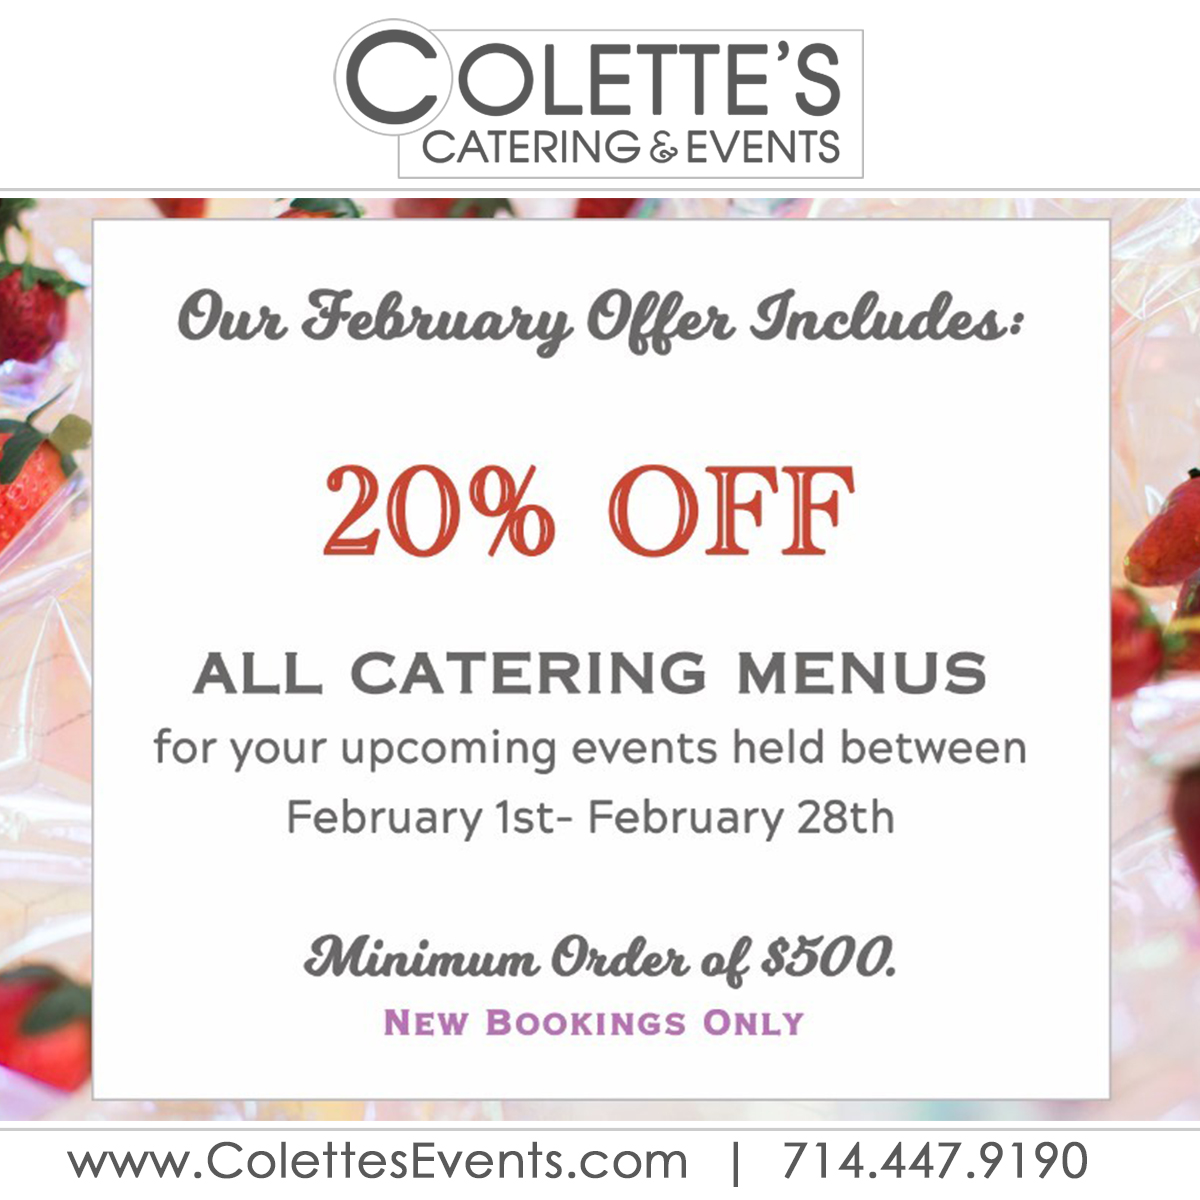 Colette's Feb. Special